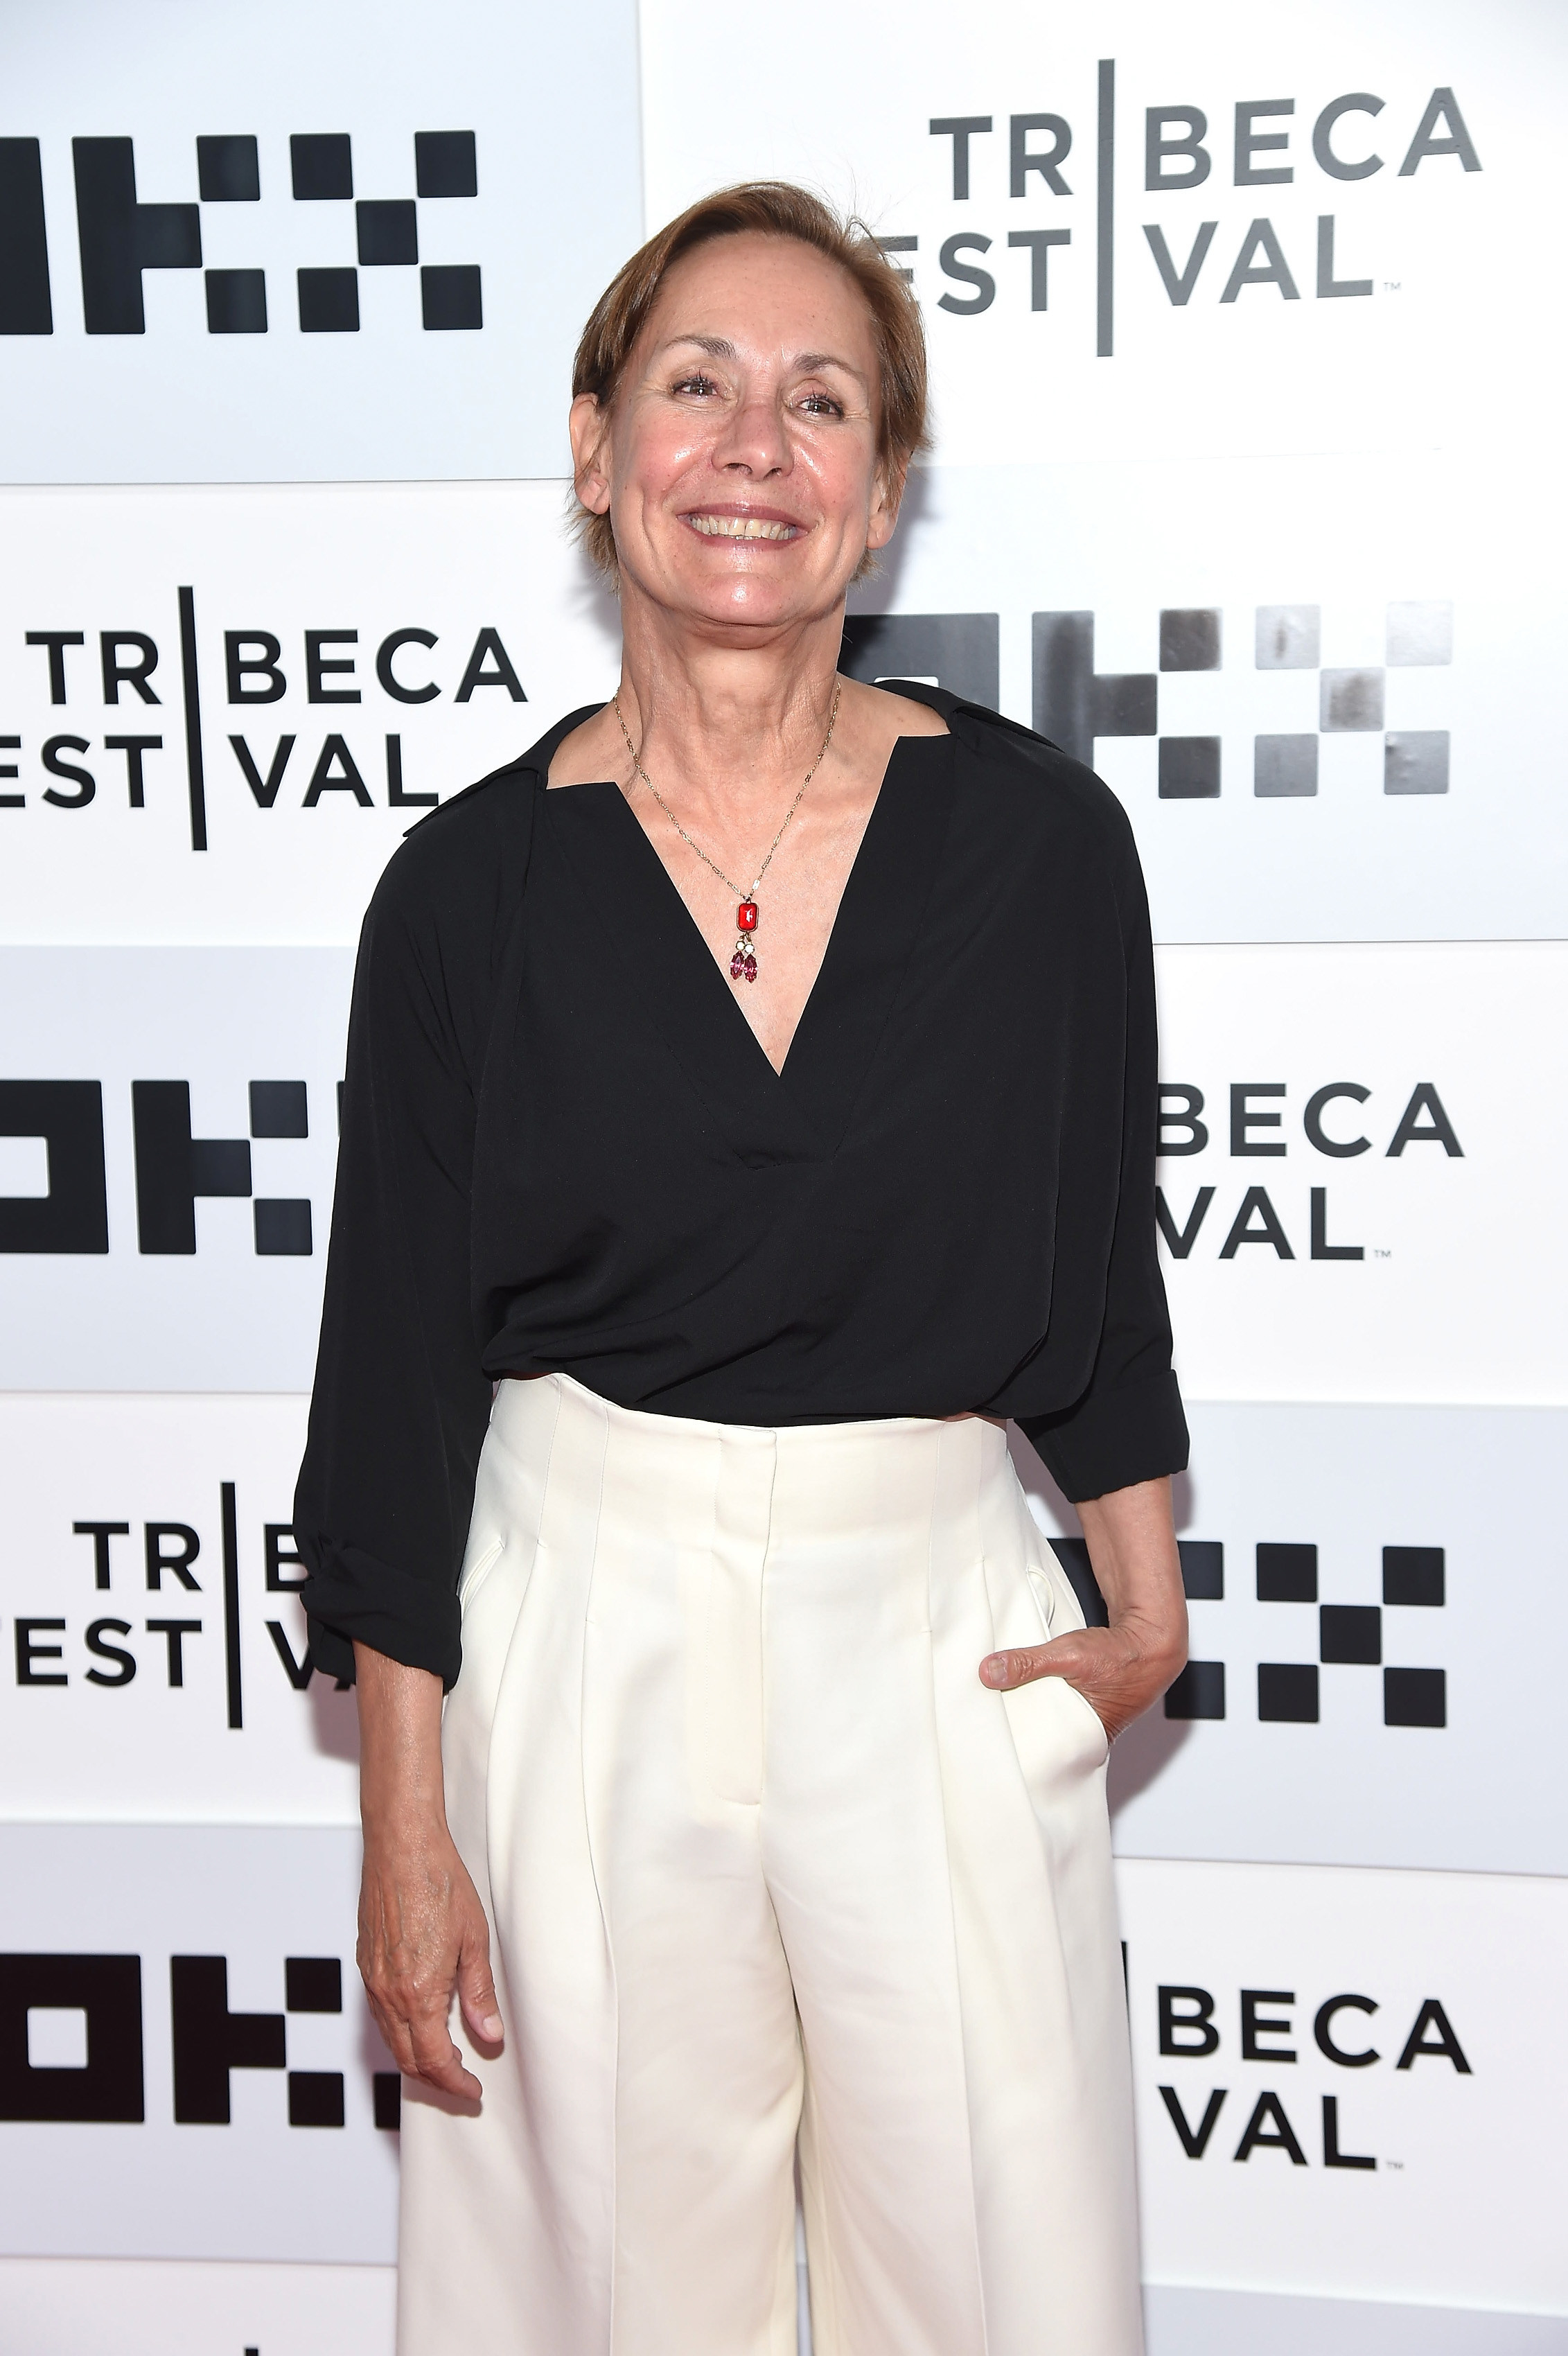 Laurie smiling on the red carpet